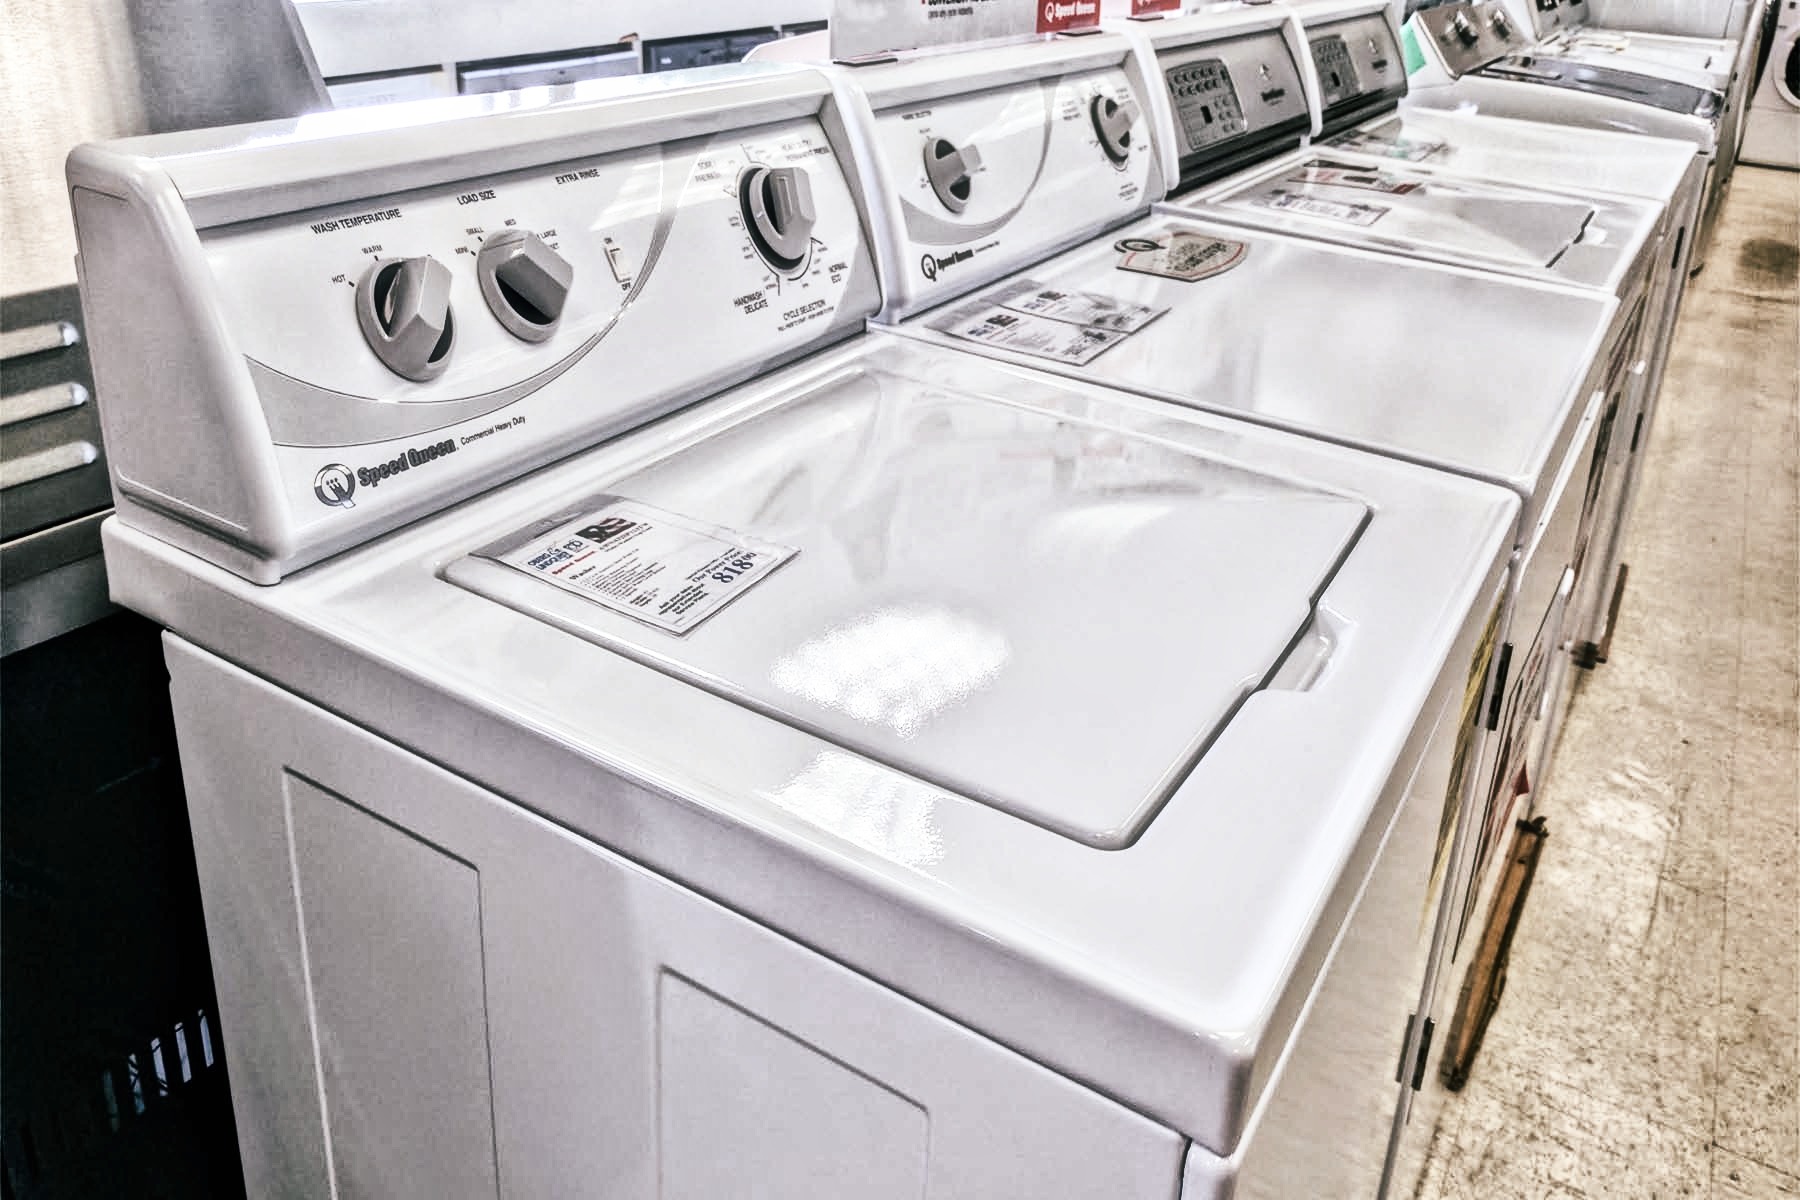 Speed Queen Washer Troubleshooting for Hotels and Inns in Georgetown, TX